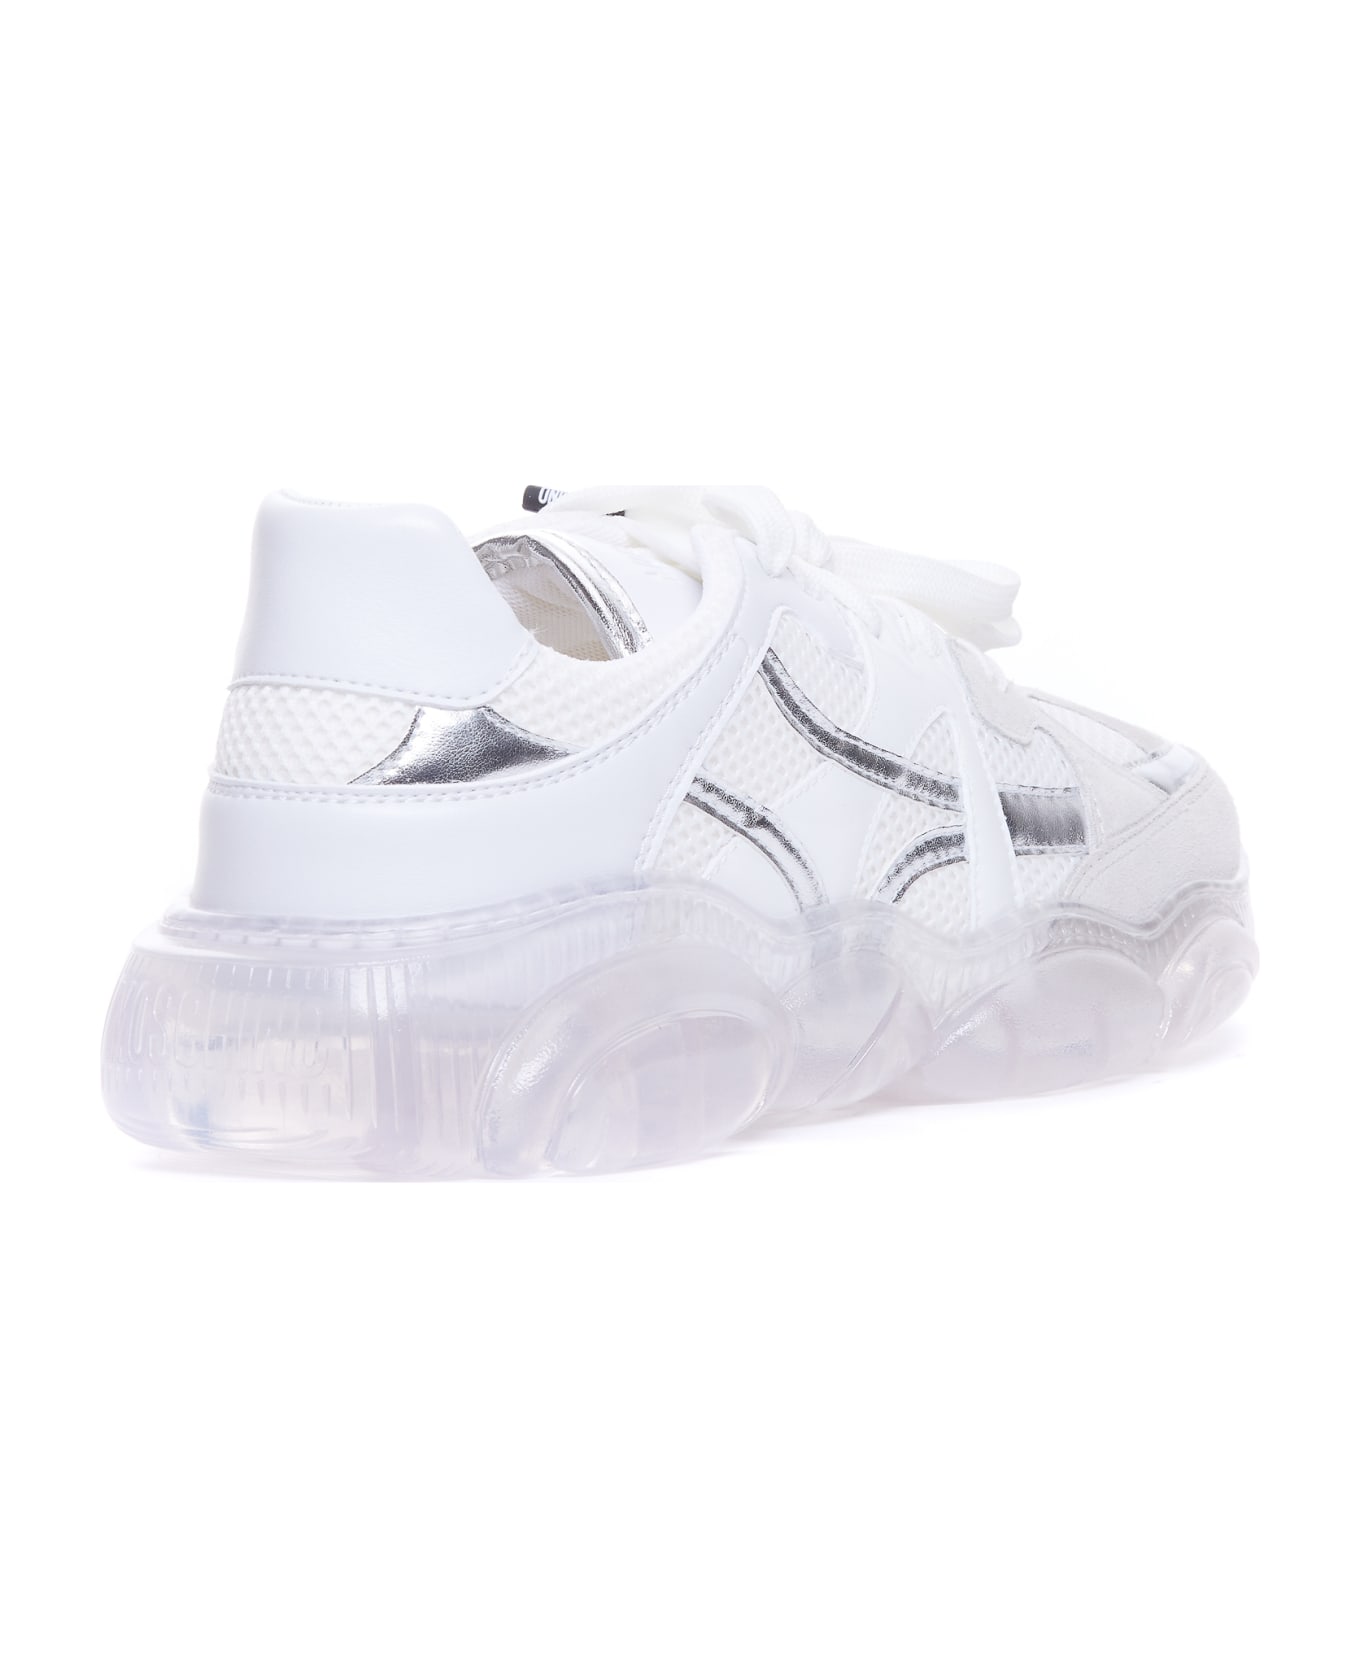 Moschino Teddy Shoes With Transparent Sole - White